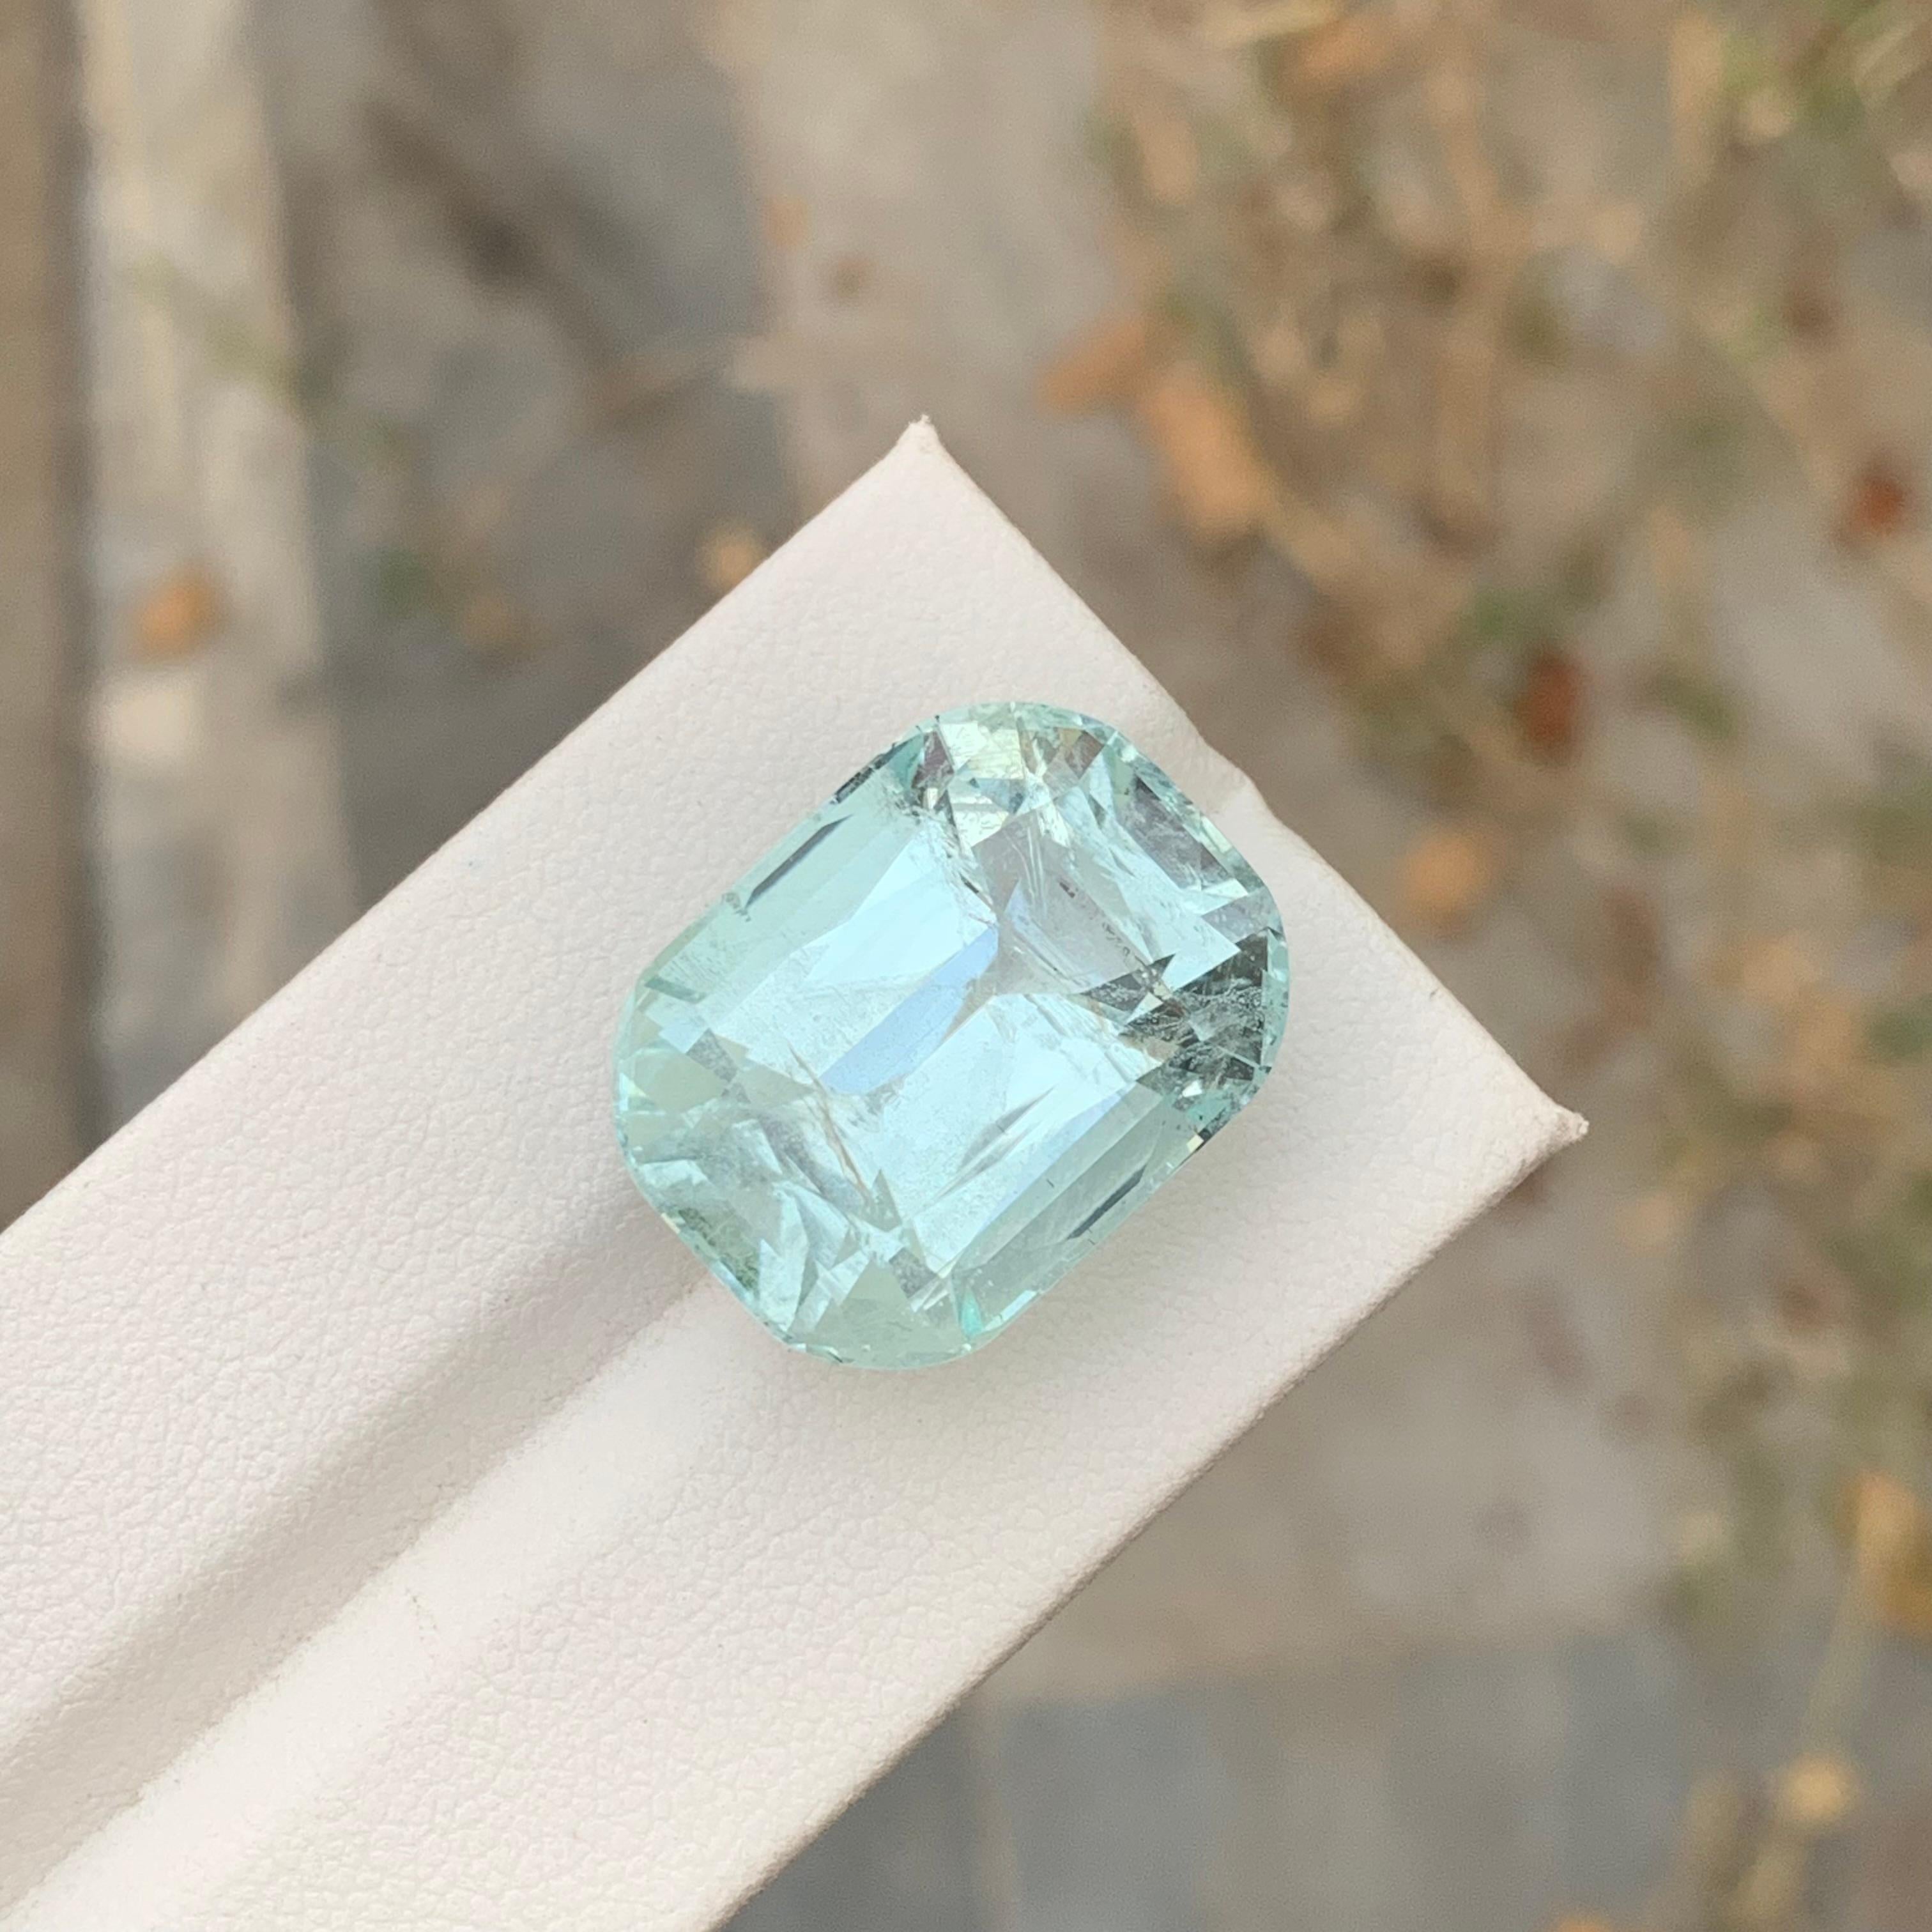 29.75 Carats Gigantic Natural Loose Aquamarine Included Gem For Necklace Jewelry For Sale 3